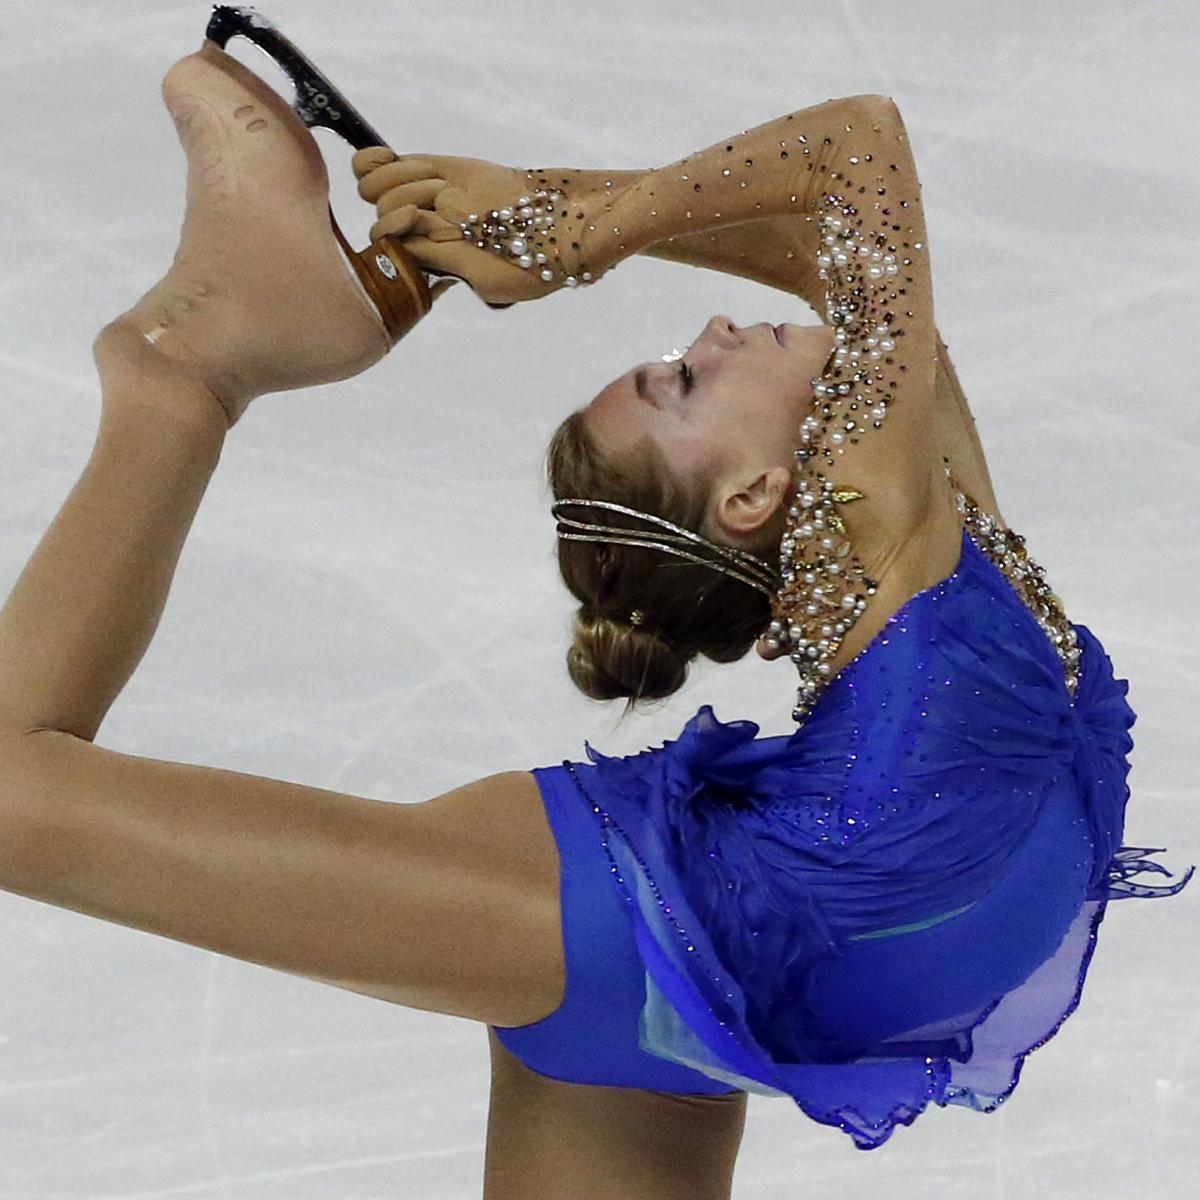 ISU Figure Skating Grand Prix 2014: Results, Top Finishers from France